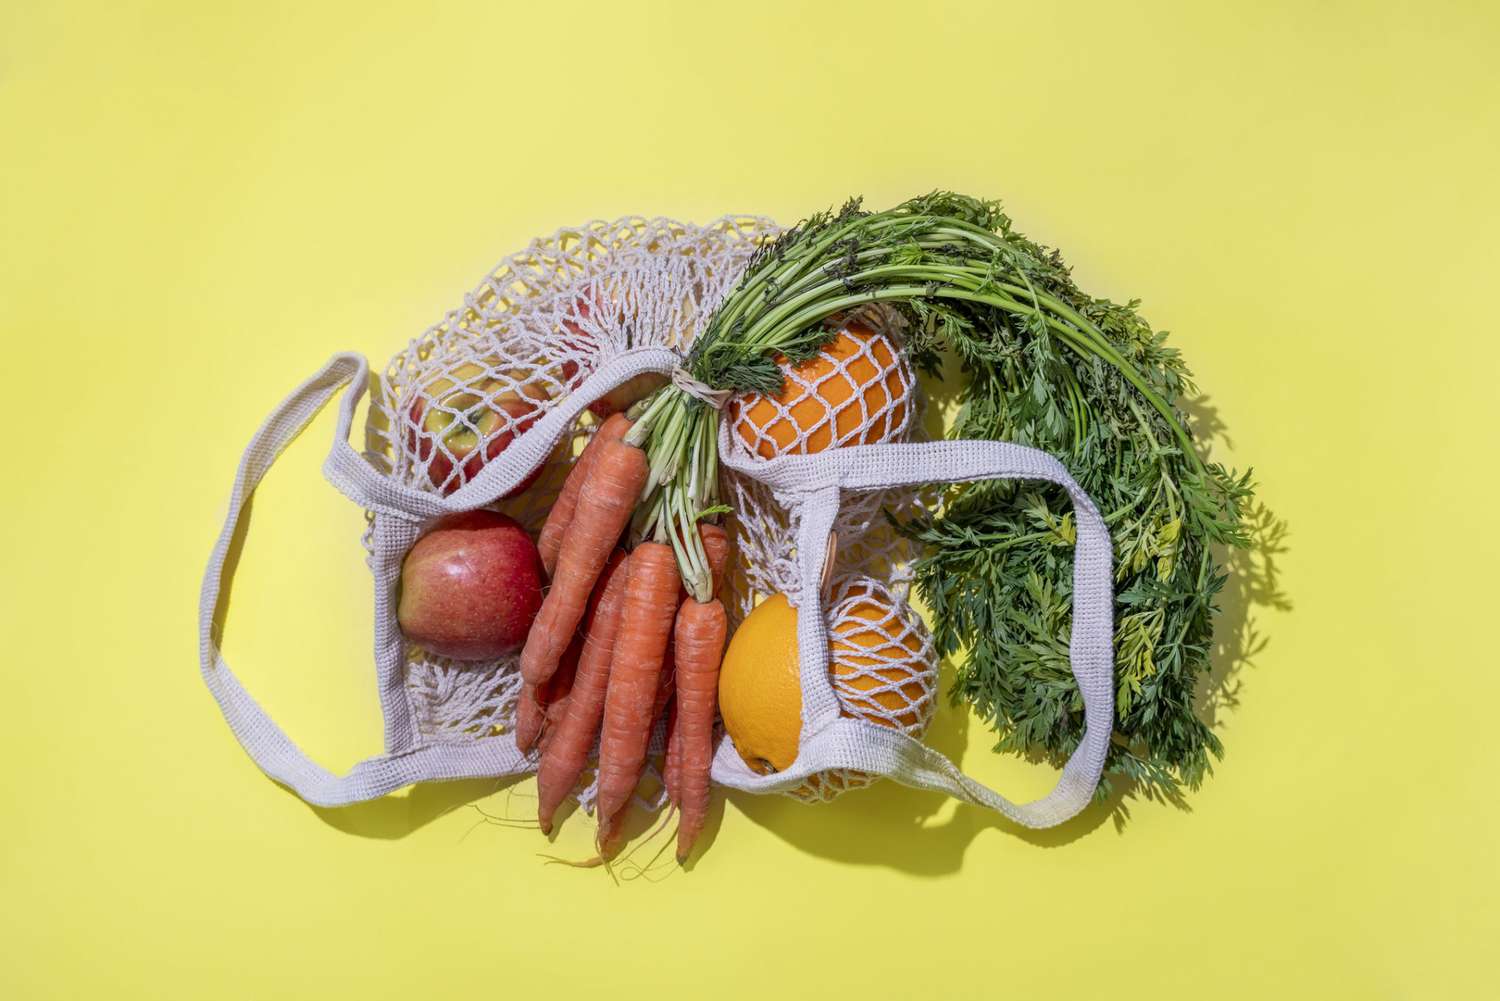 An image of a reusable mesh bag with fruit And vegetables in it.